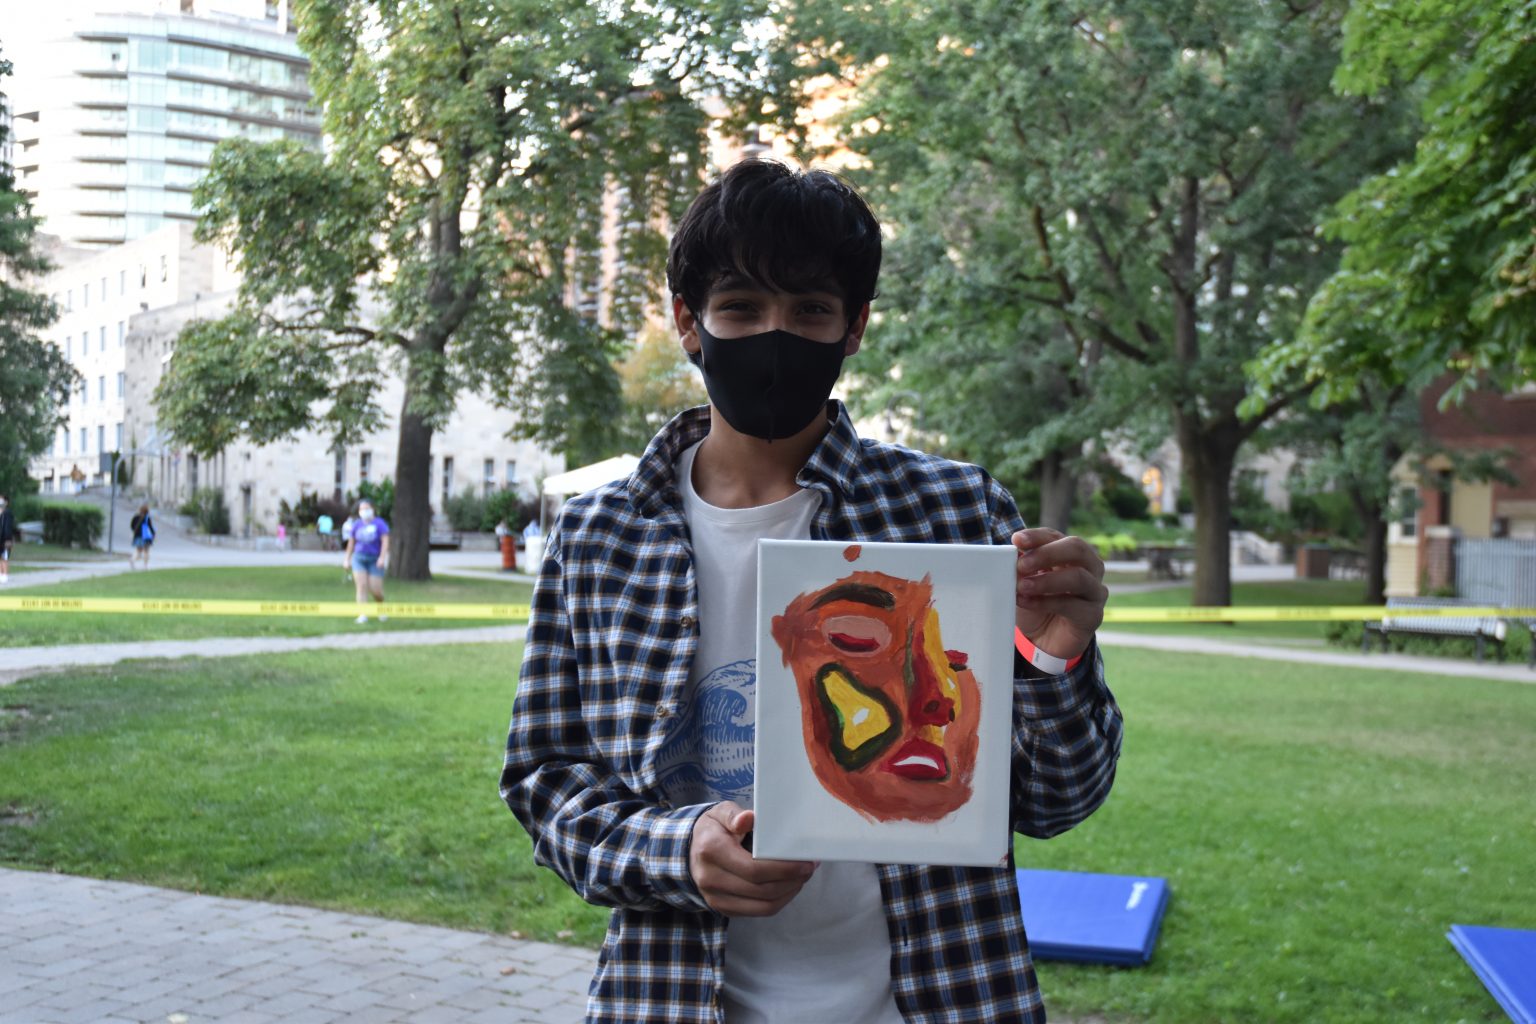 Photograph of a new St. Mike's student holding up a graphic painting of a face